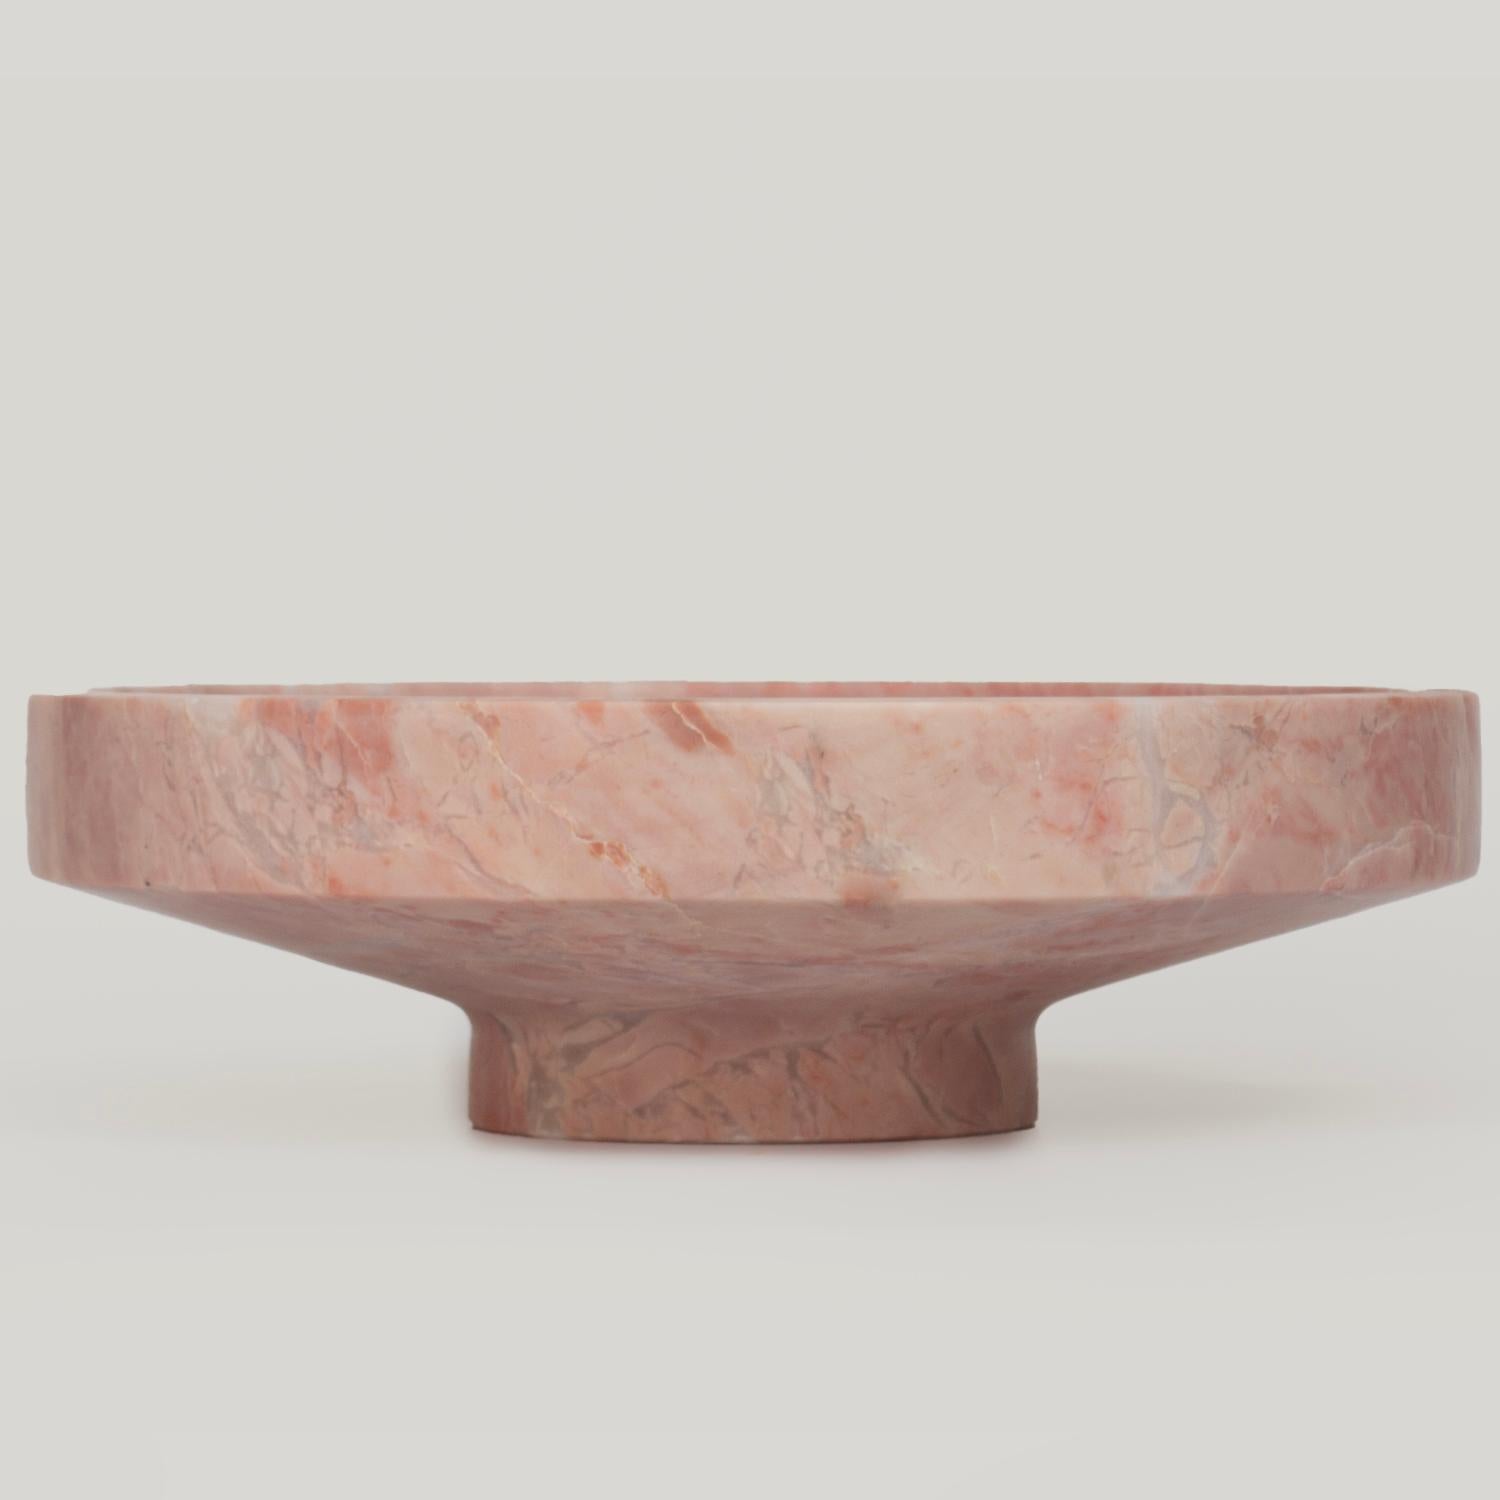 Stunning, aesthetic, timeless are words that can be used to describe this elegant and modern pink marble narrow  bowl from Kiwano. Expertly crafted and finished by hand, our travertine bowls are a study in sculptural simplicity. Natural variations